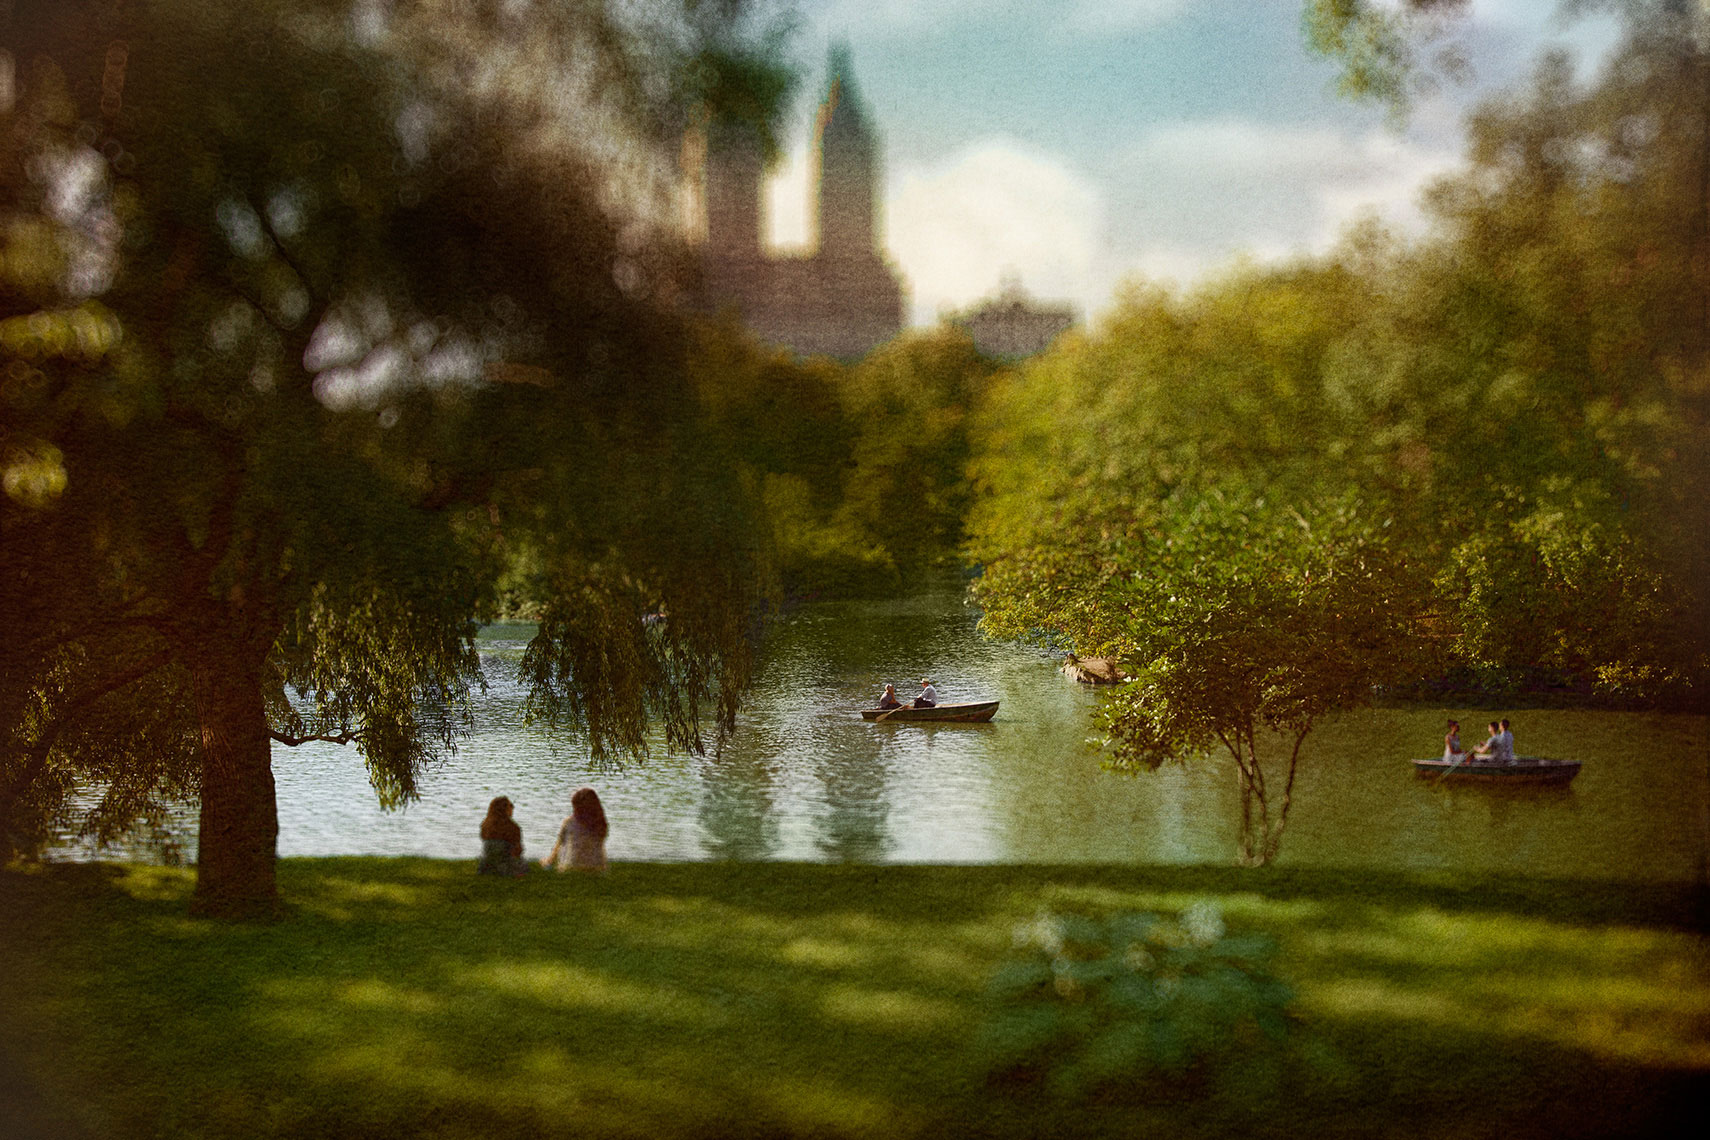 Quiet afternoon in Central Park with two women sitting on sun-dappled grass under a Willow tree with row boats on the lake and an apartment building in the distance.